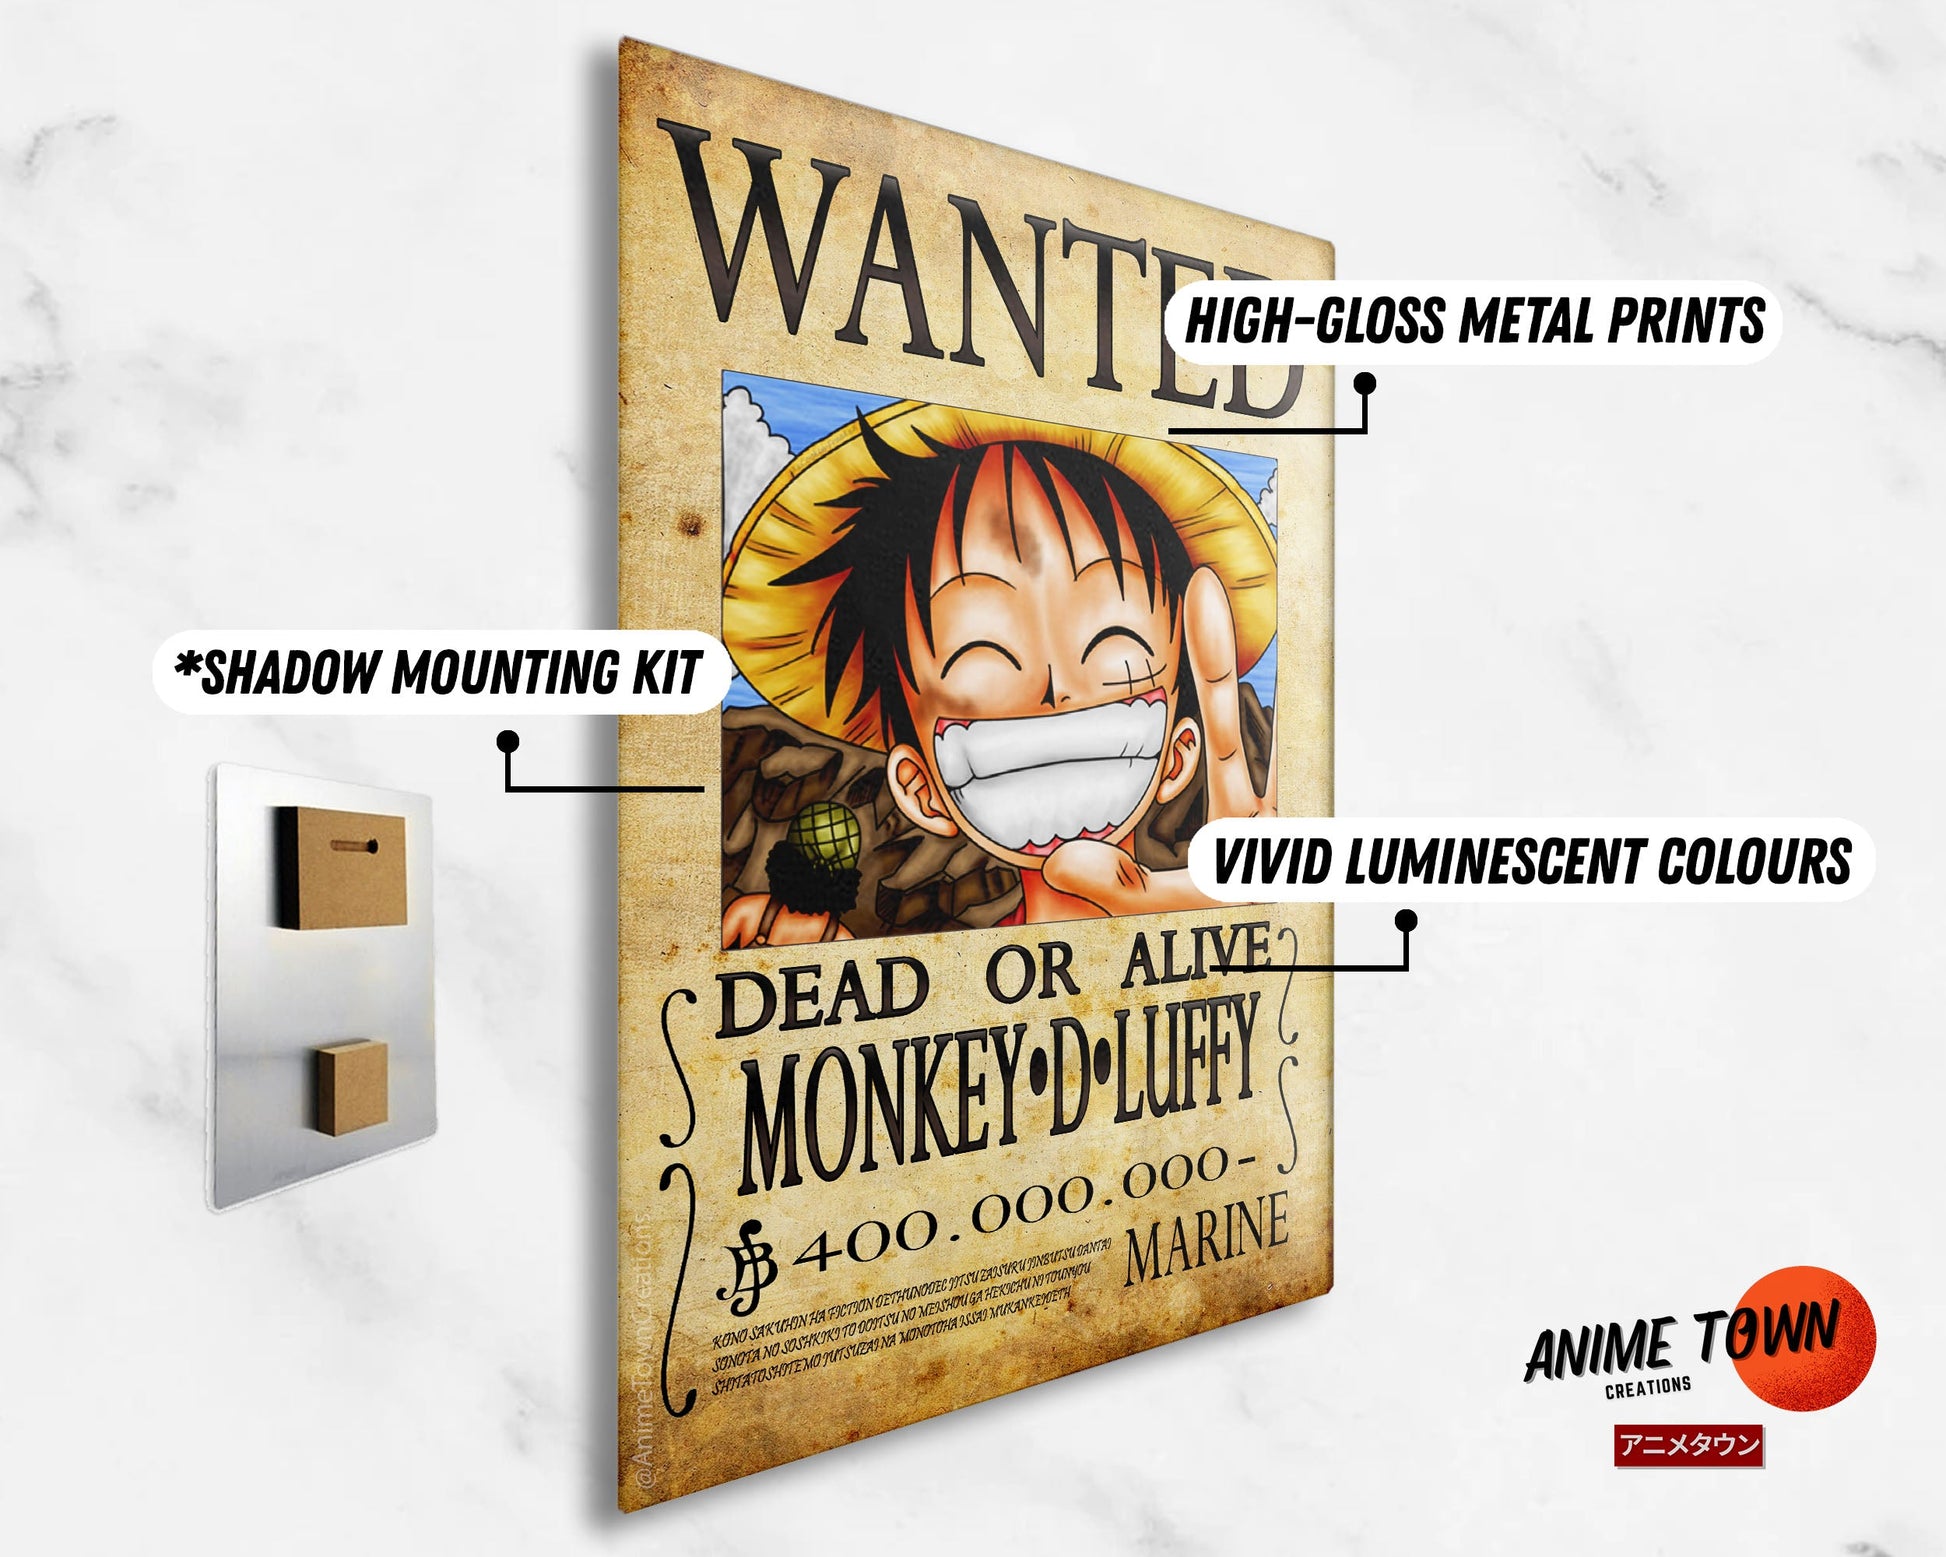 One Piece - Monkey D Luffy Wanted | Poster & Sticker mural